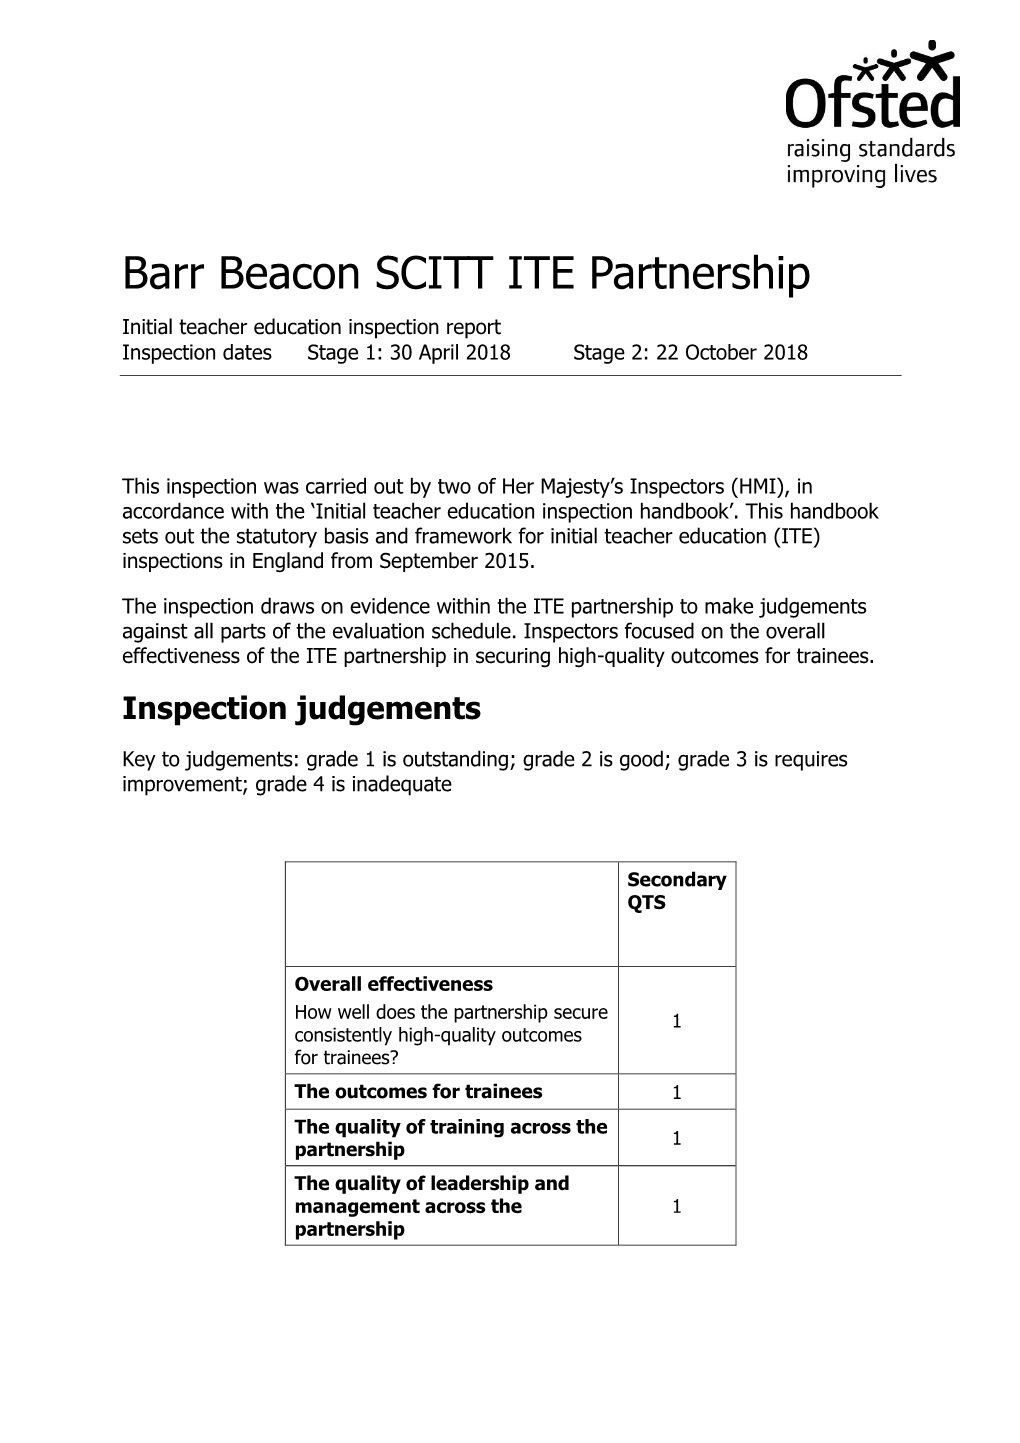 Barr Beacon SCITT ITE Partnership Initial Teacher Education Inspection Report Inspection Dates Stage 1: 30 April 2018 Stage 2: 22 October 2018